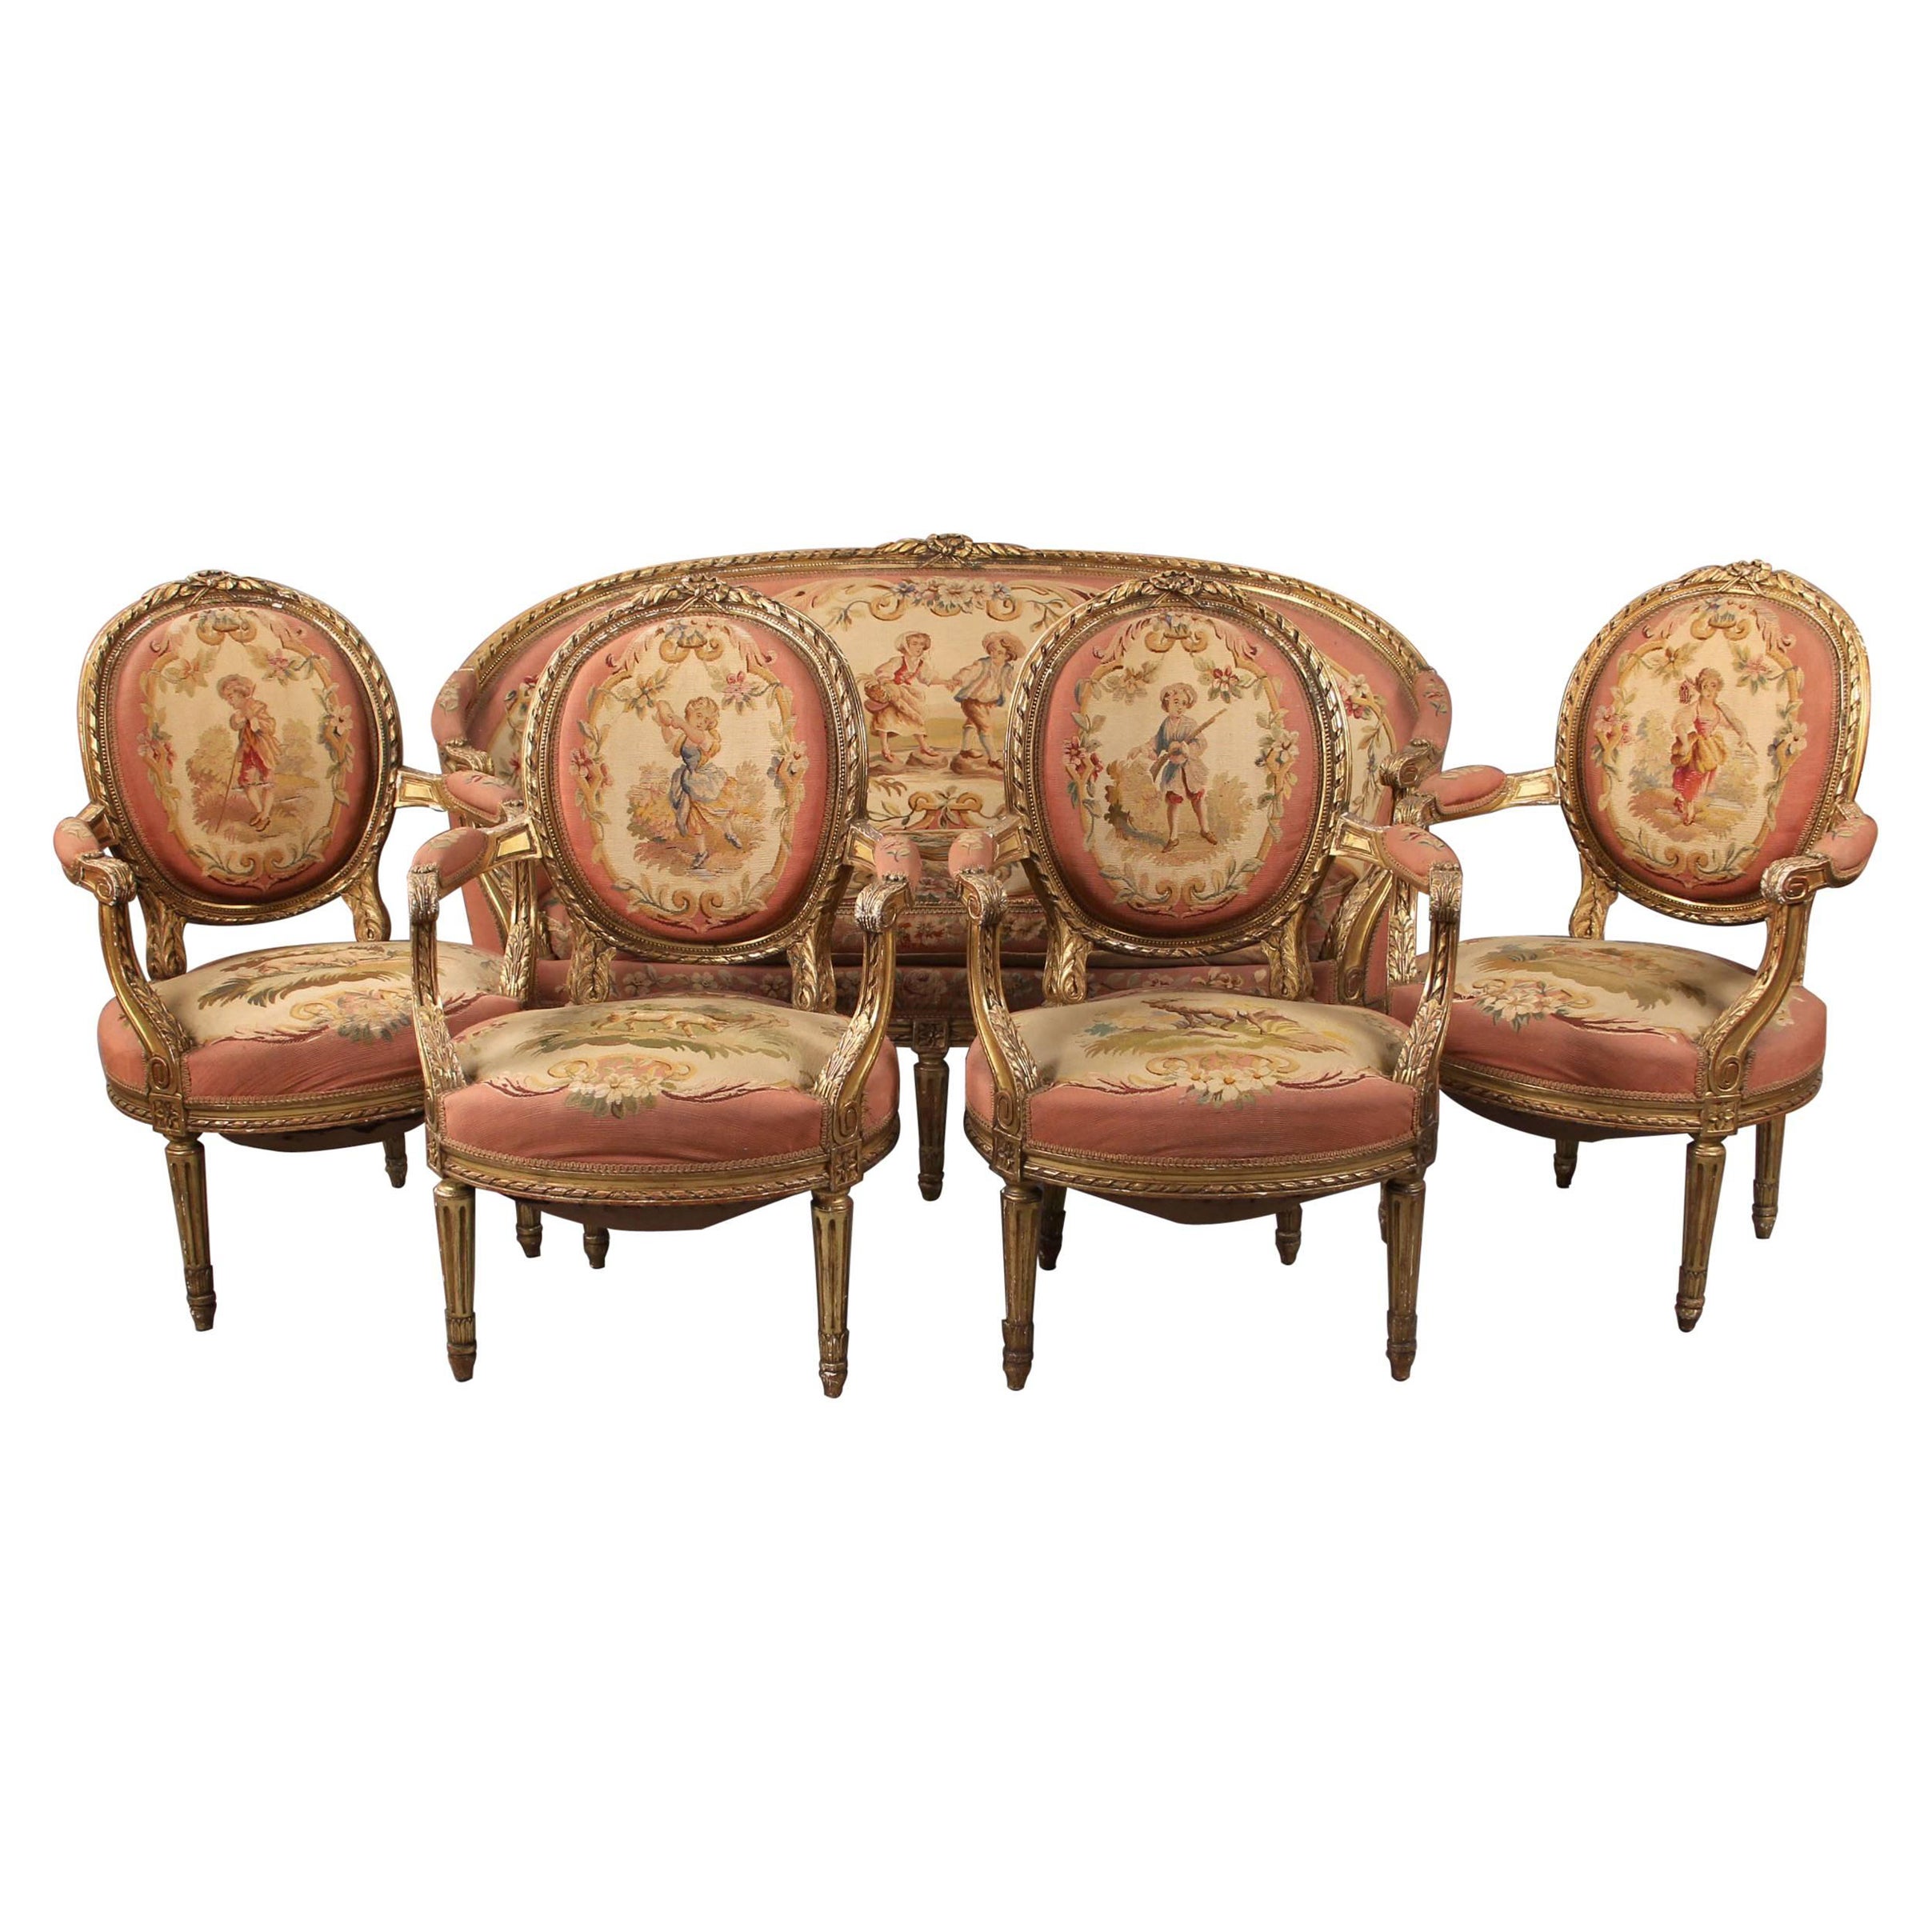 Beautiful Late 19th Century Five-Piece Carved Giltwood Aubusson Parlor Set